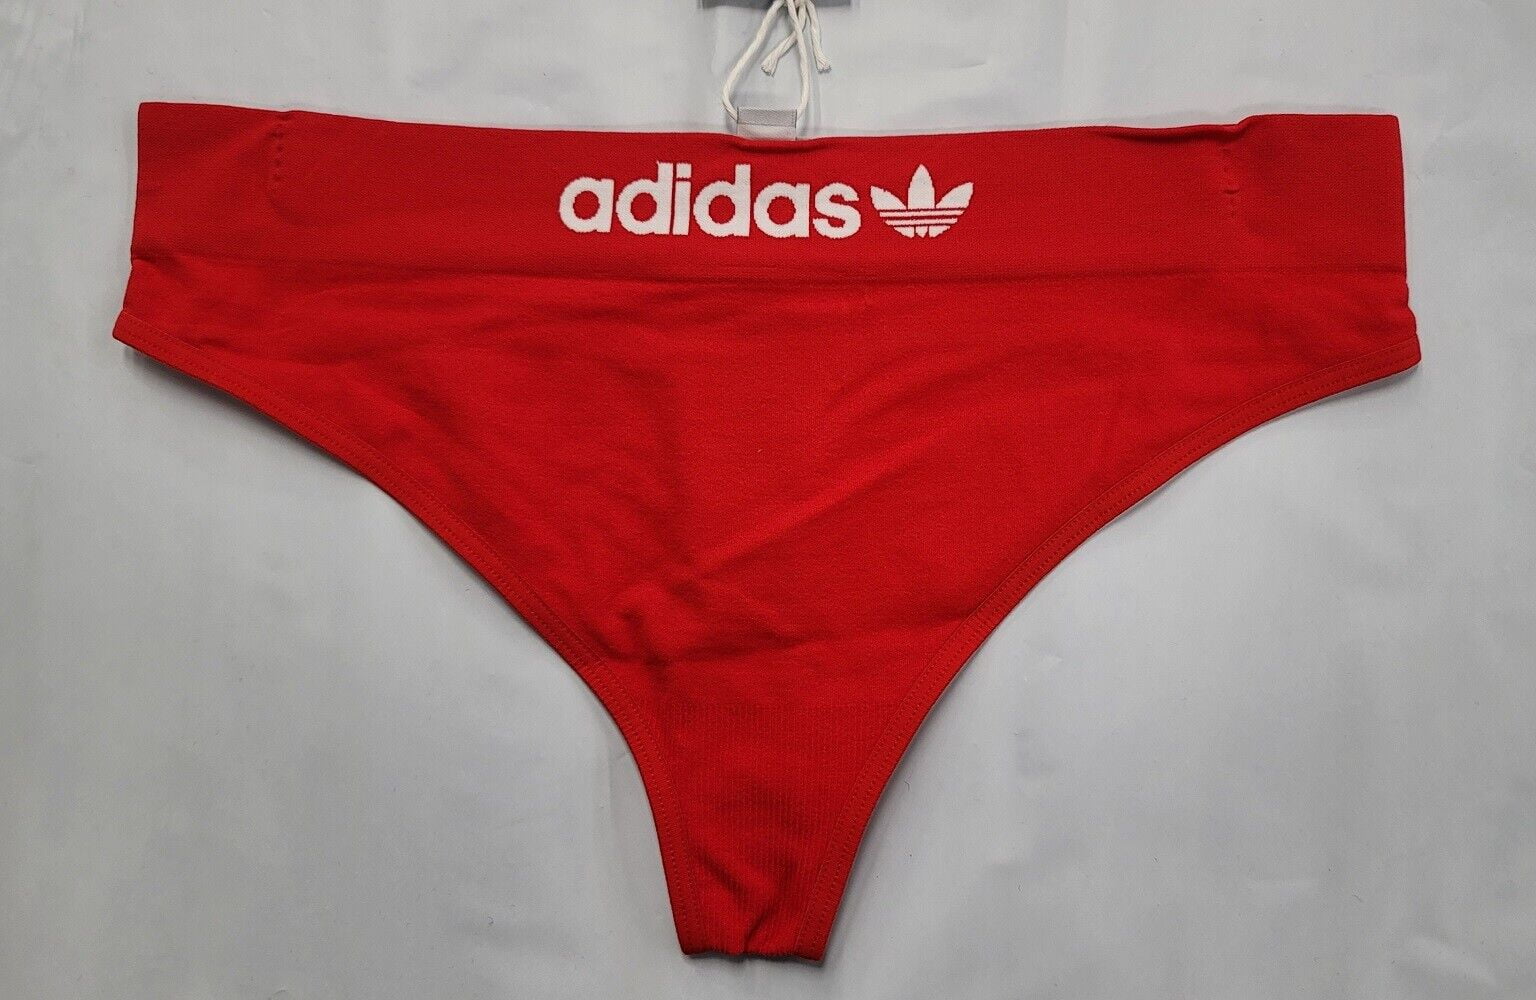 Adidas Women's Seamless Thong Underwear (Red, Small) - 4A1H64